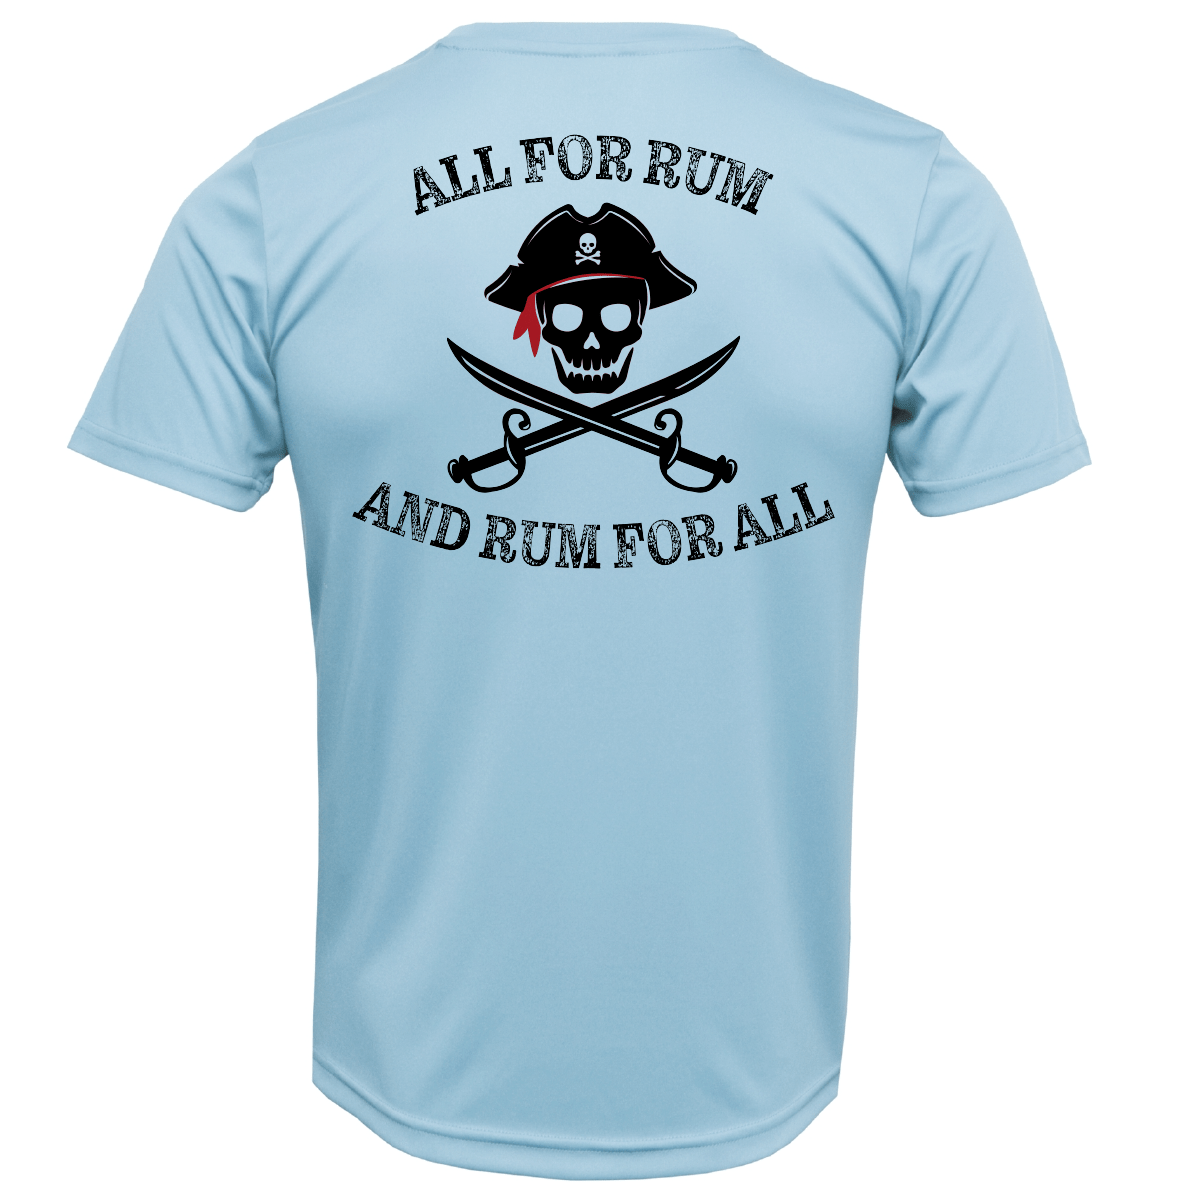 Saltwater Born Shirts Tarpon Springs, FL "All For Rum and Rum For All" Men's Short Sleeve UPF 50+ Dry-Fit Shirt